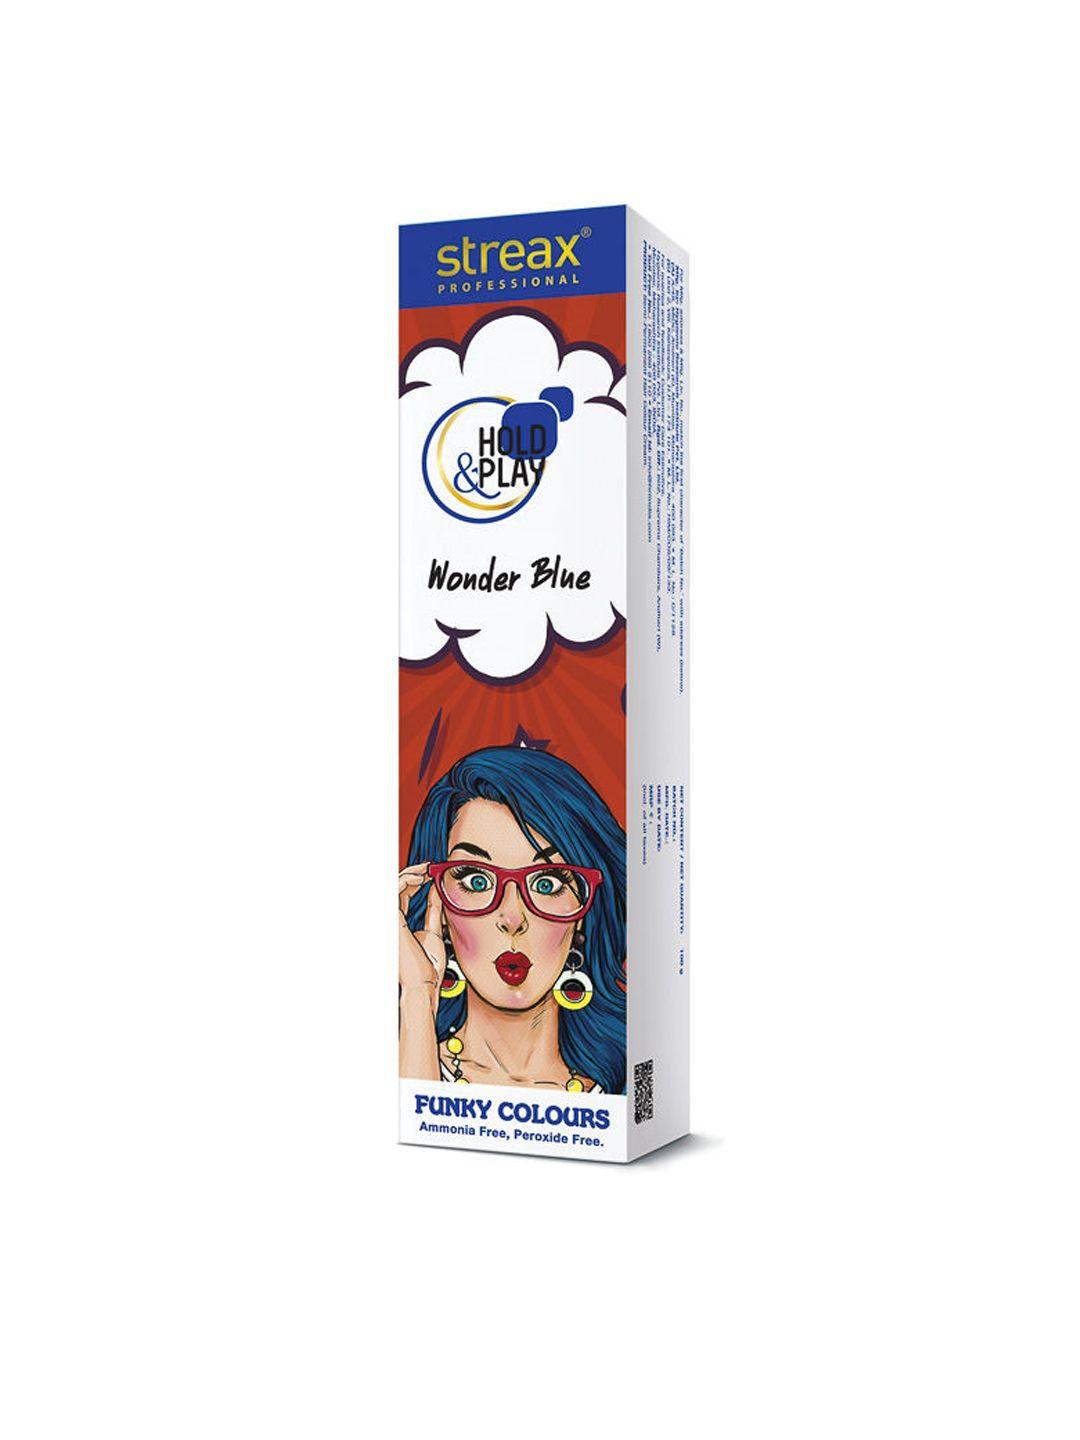 streax professional hold & play funky colour - wonder blue- 100 g